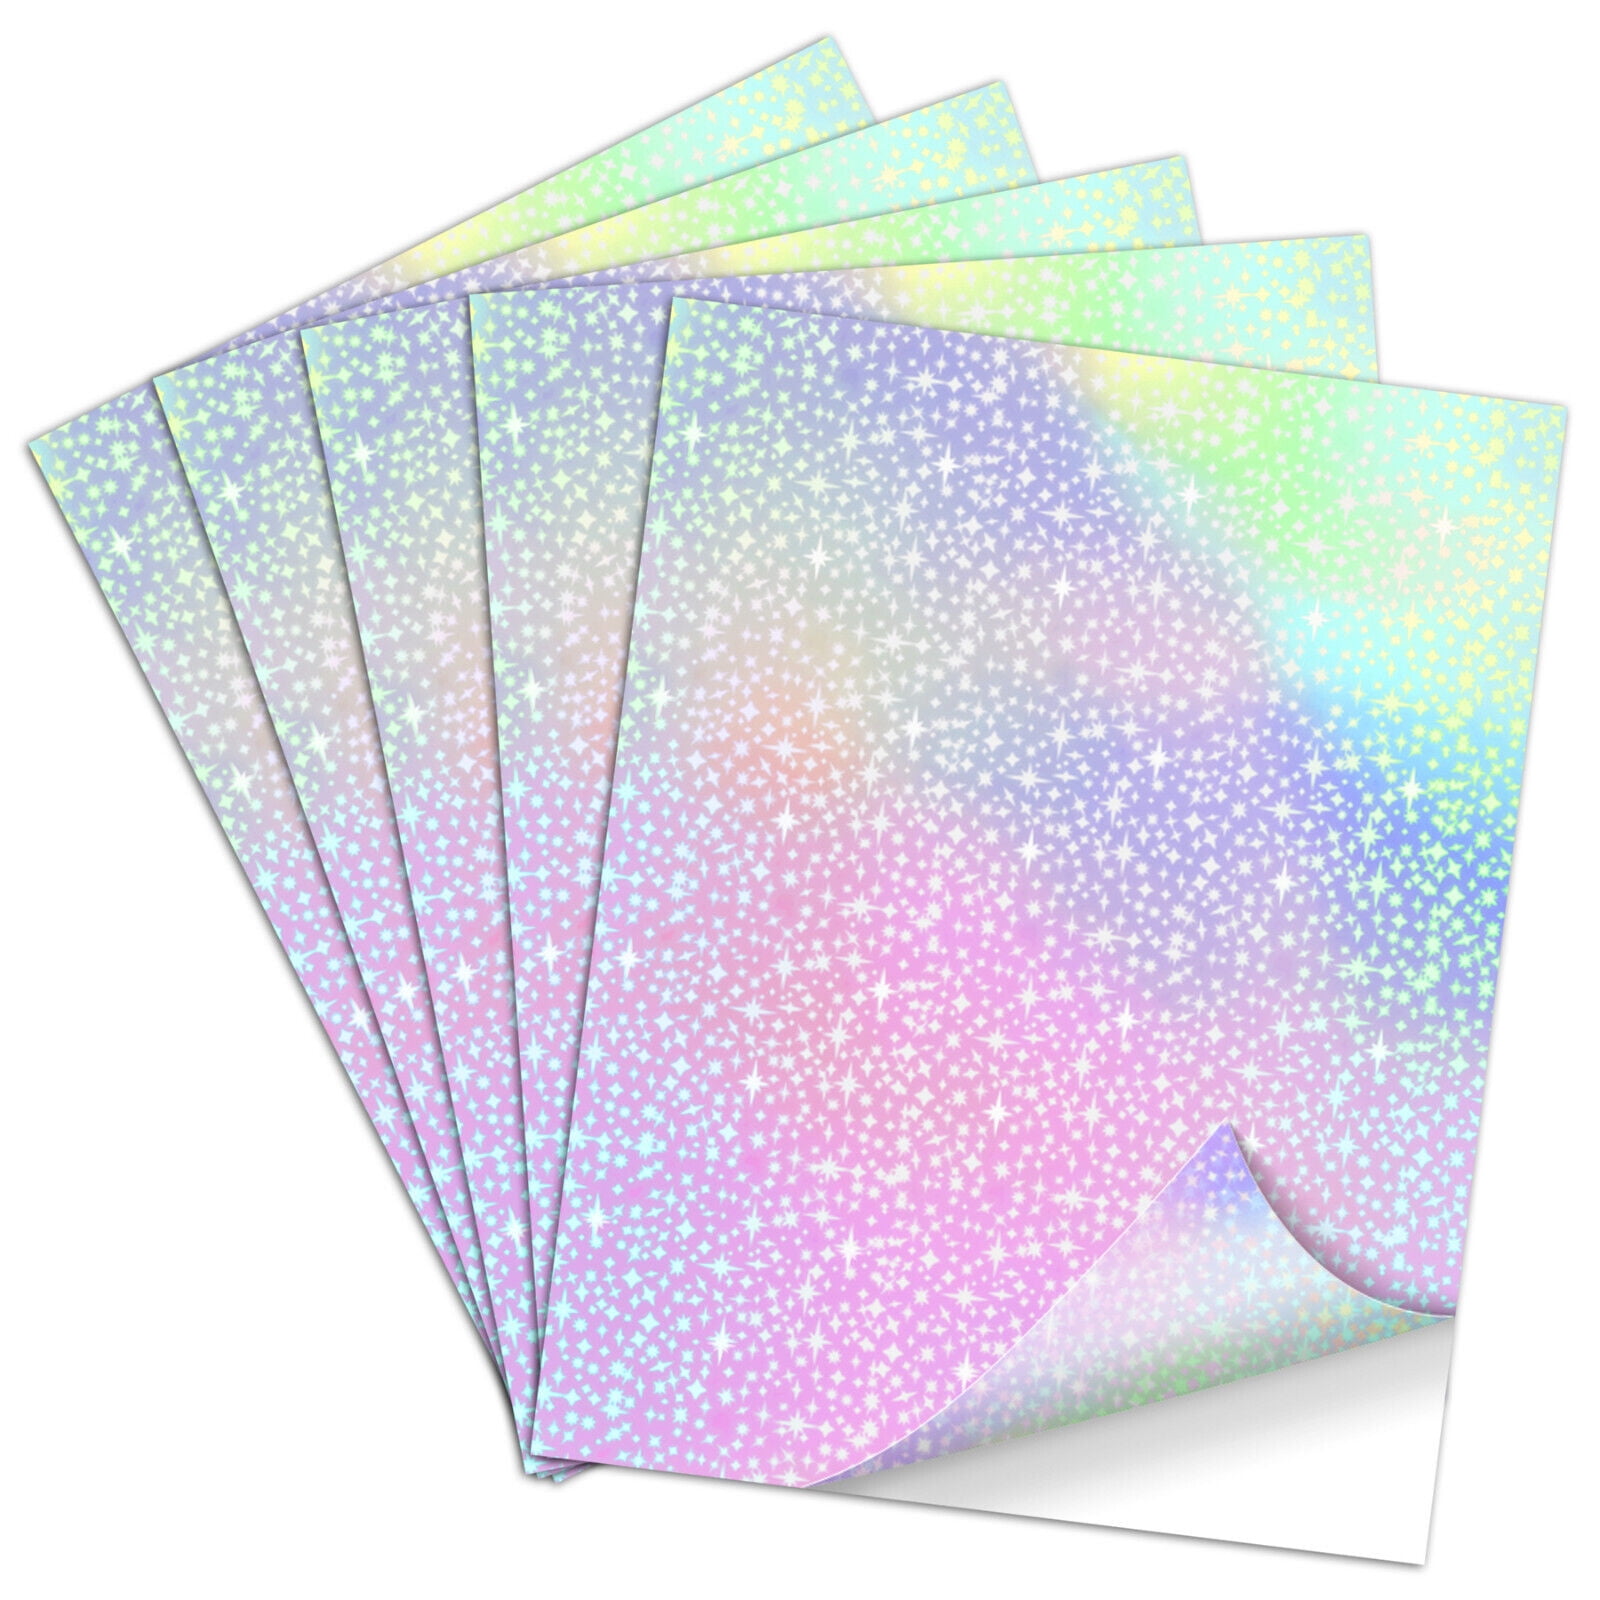 72 Sheets Holographic Sticker Paper, Transparent Holographic A4 Vinyl  Laminate Film, Clear Overlay Lamination Sticker Paper Self Adhesive  Waterproof